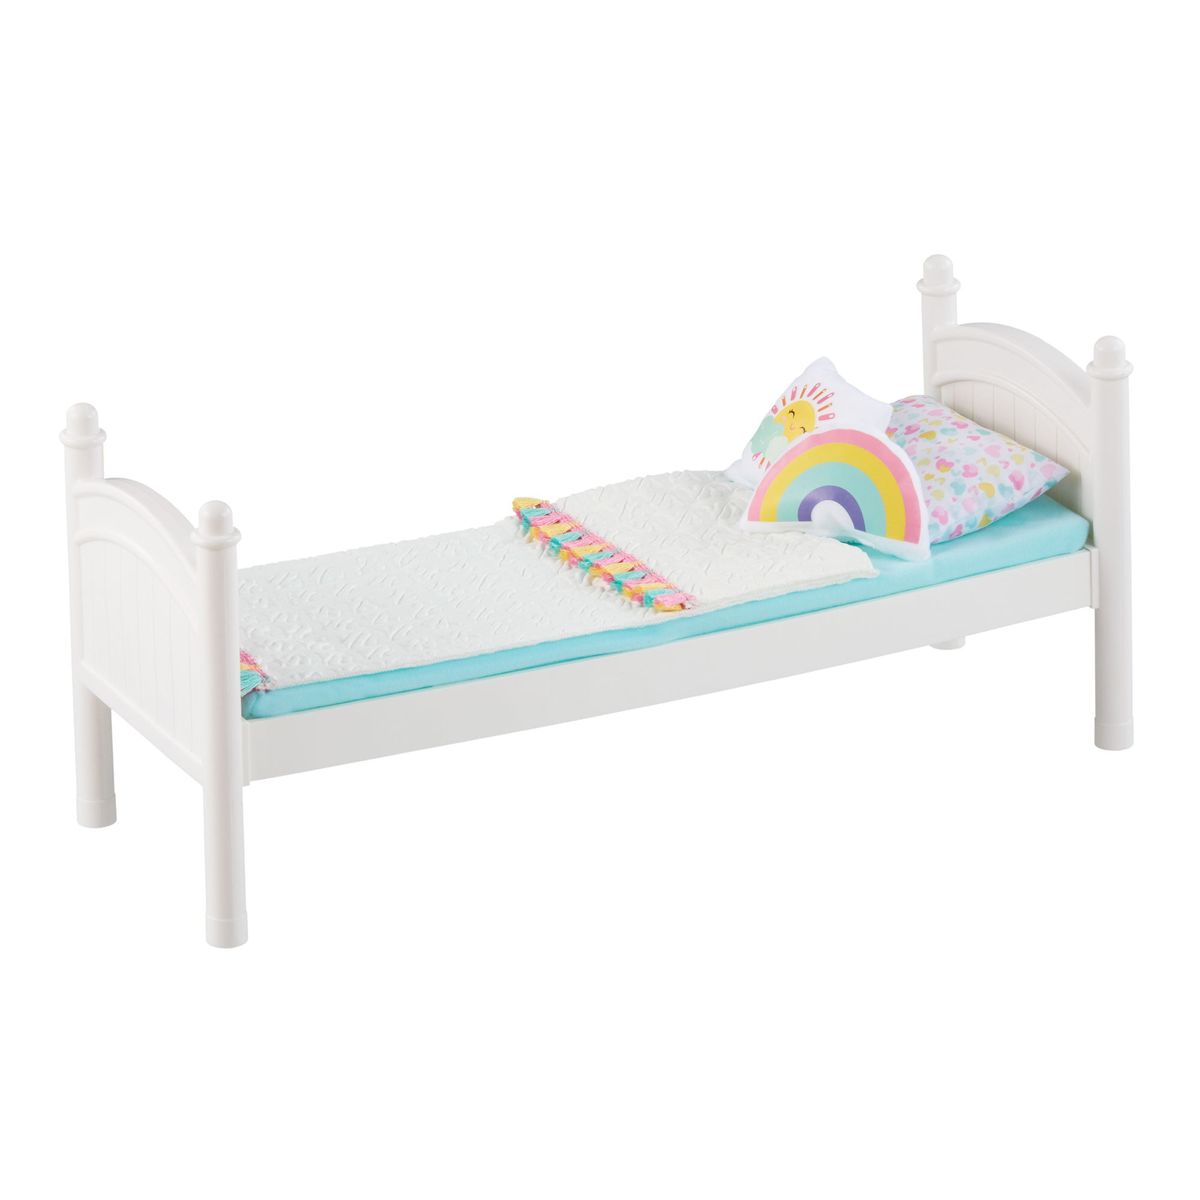 [RDY] [̵] ޥ饤A 18ɡѥå󥰥٥åɥץ쥤å6å [ŷ] | My Life A 6-Piece Stackable Bed Play Set for 18 Inch Dolls